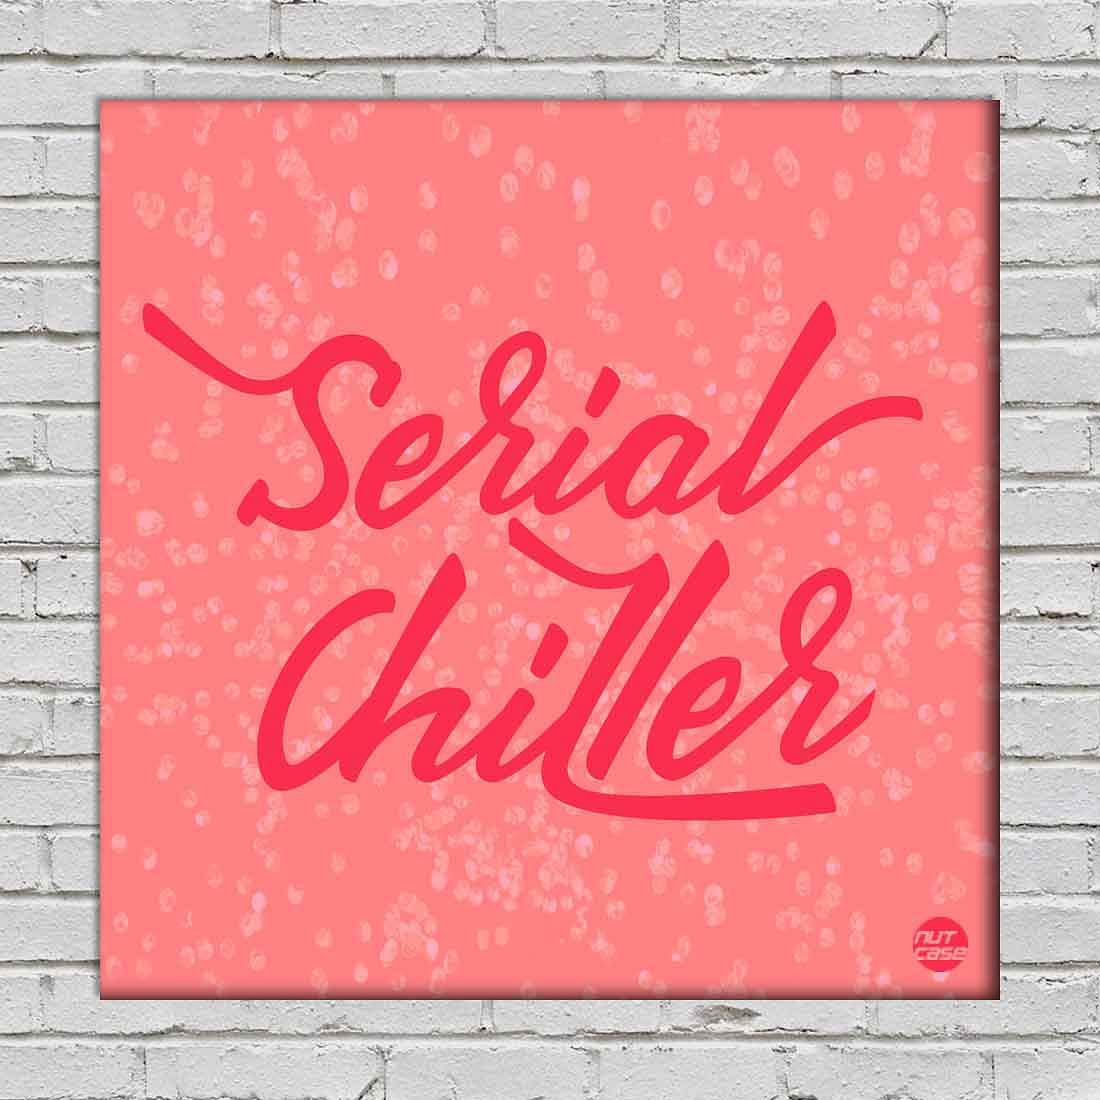 Wall Art Decor Panel For Home - Serial Chiller Pink Nutcase